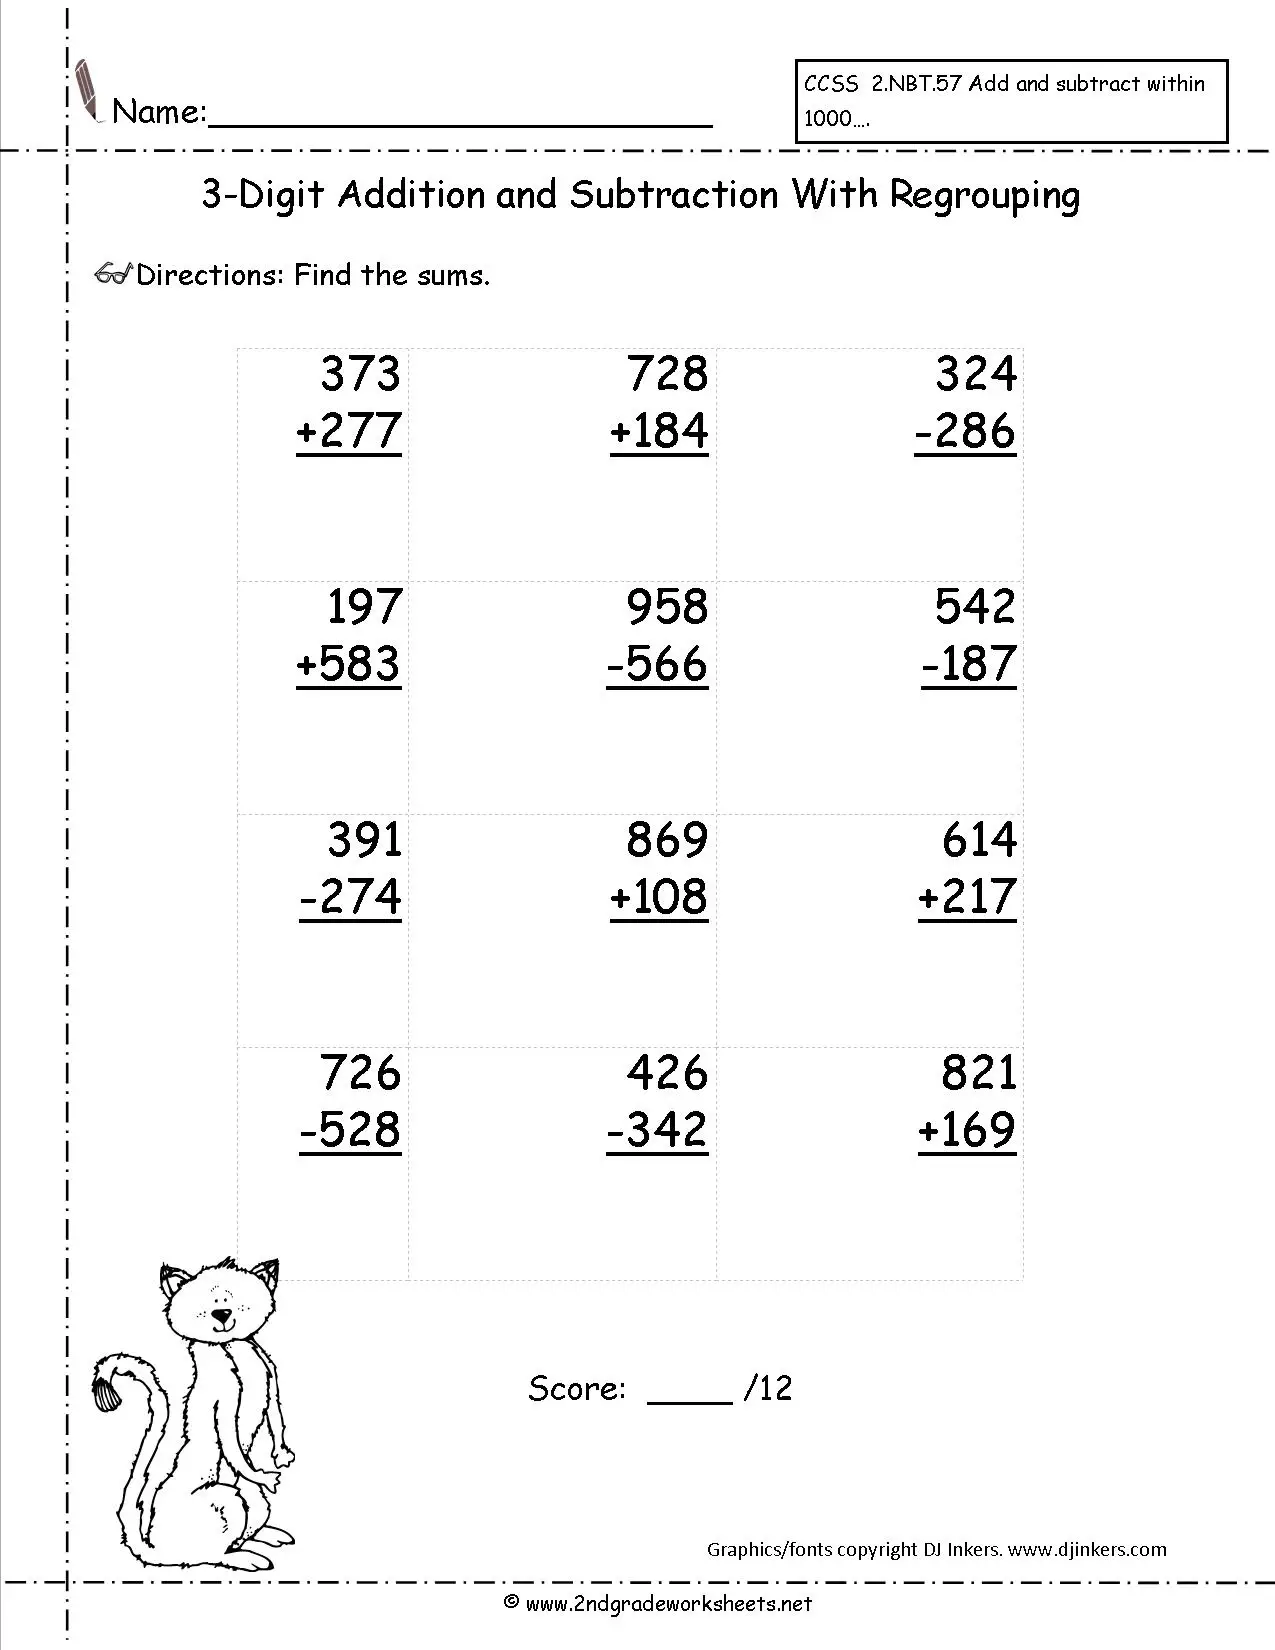 addition-and-subtraction-worksheets-printable